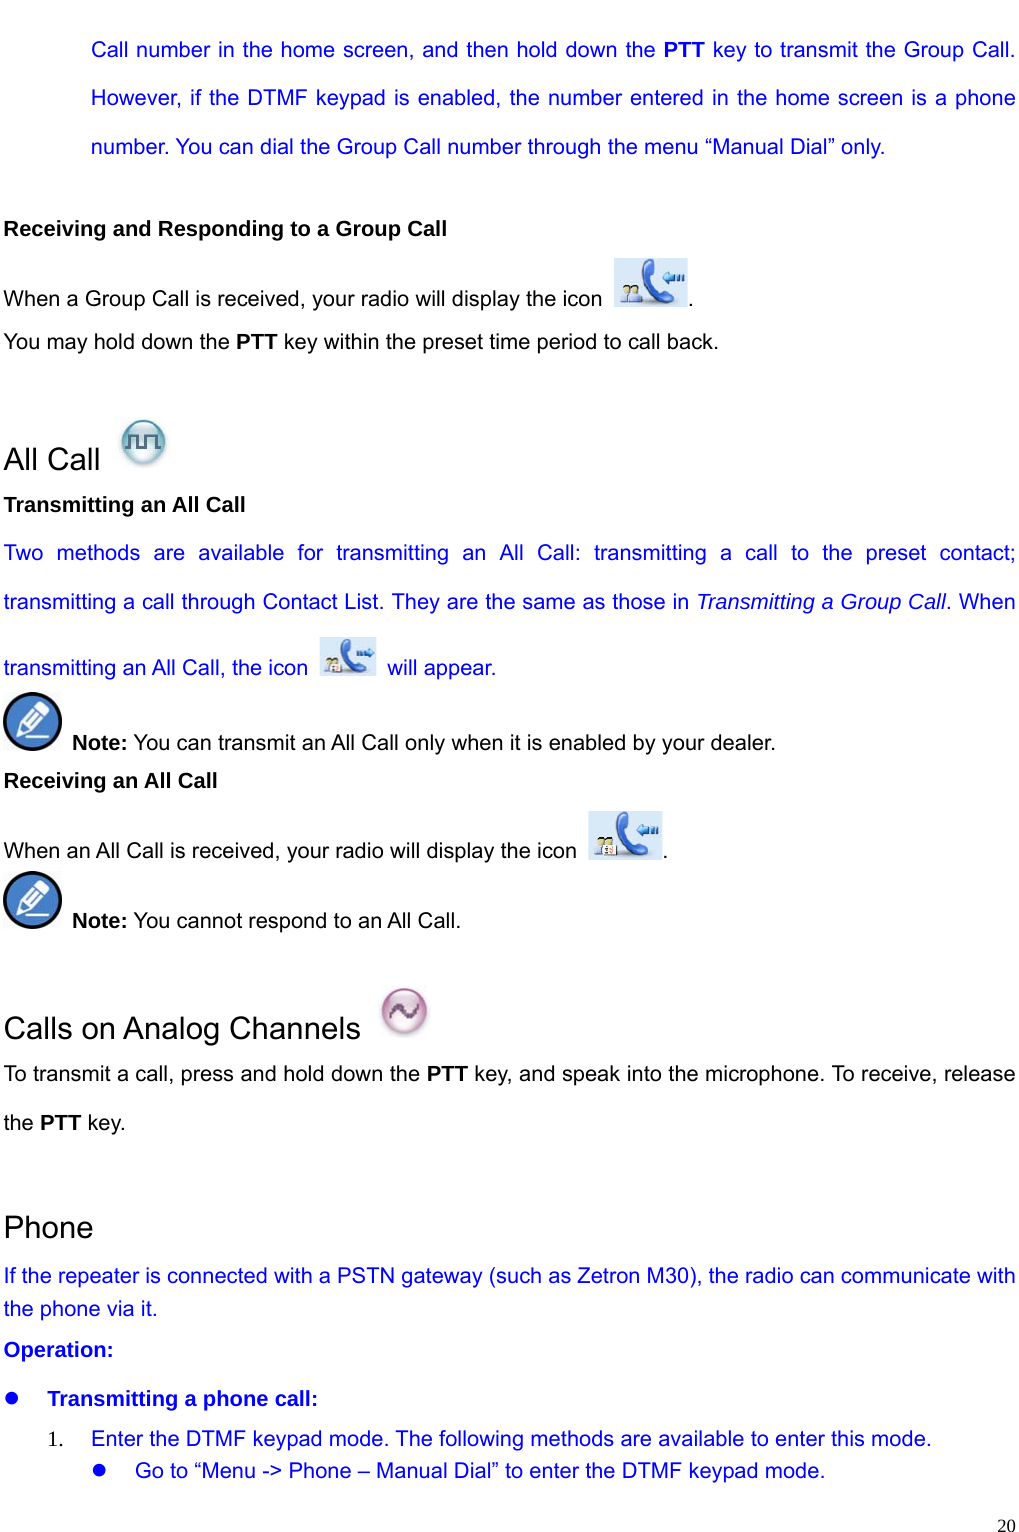                                                                                                              20Call number in the home screen, and then hold down the PTT key to transmit the Group Call. However, if the DTMF keypad is enabled, the number entered in the home screen is a phone number. You can dial the Group Call number through the menu “Manual Dial” only.    Receiving and Responding to a Group Call When a Group Call is received, your radio will display the icon  . You may hold down the PTT key within the preset time period to call back.    All Call   Transmitting an All Call Two methods are available for transmitting an All Call: transmitting a call to the preset contact; transmitting a call through Contact List. They are the same as those in Transmitting a Group Call. When transmitting an All Call, the icon   will appear.  Note: You can transmit an All Call only when it is enabled by your dealer. Receiving an All Call When an All Call is received, your radio will display the icon  .  Note: You cannot respond to an All Call.    Calls on Analog Channels   To transmit a call, press and hold down the PTT key, and speak into the microphone. To receive, release the PTT key.    Phone If the repeater is connected with a PSTN gateway (such as Zetron M30), the radio can communicate with the phone via it.   Operation:   z Transmitting a phone call: 1. Enter the DTMF keypad mode. The following methods are available to enter this mode.   z  Go to “Menu -&gt; Phone – Manual Dial” to enter the DTMF keypad mode. 